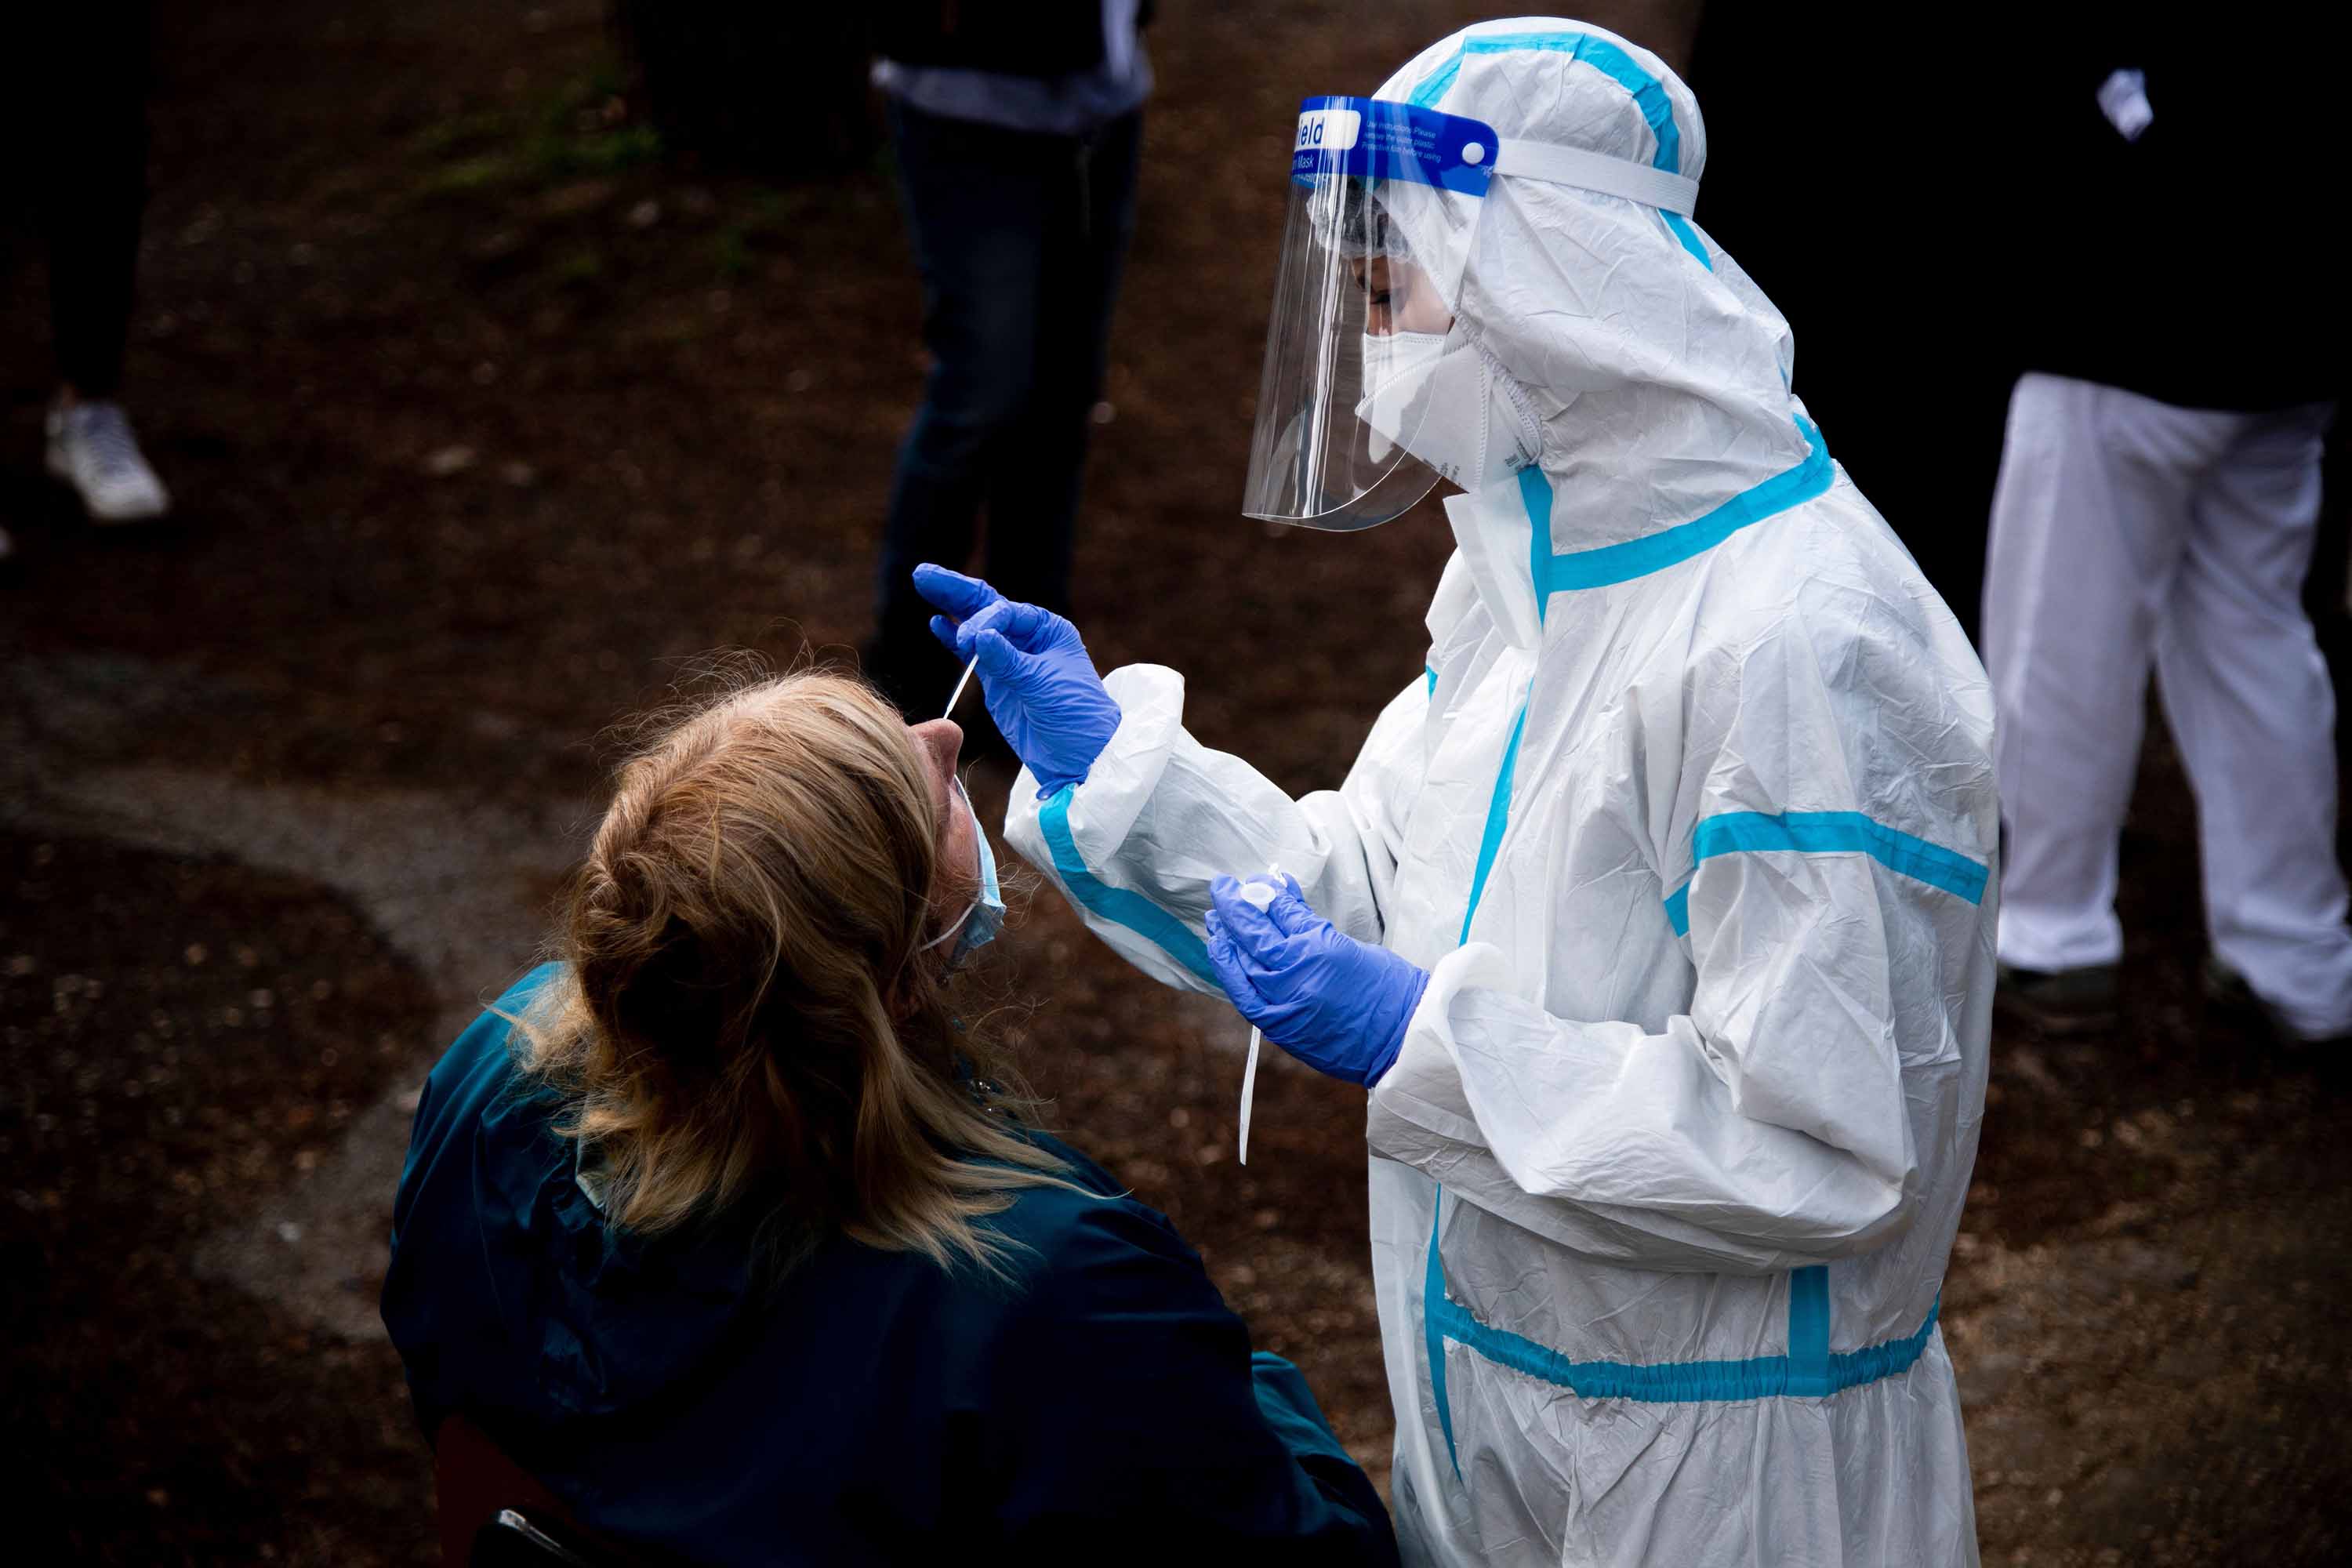 A woman undergoes a swab test for coronavirus at a drive-through testing site at a hospital in Rome, on October 12.